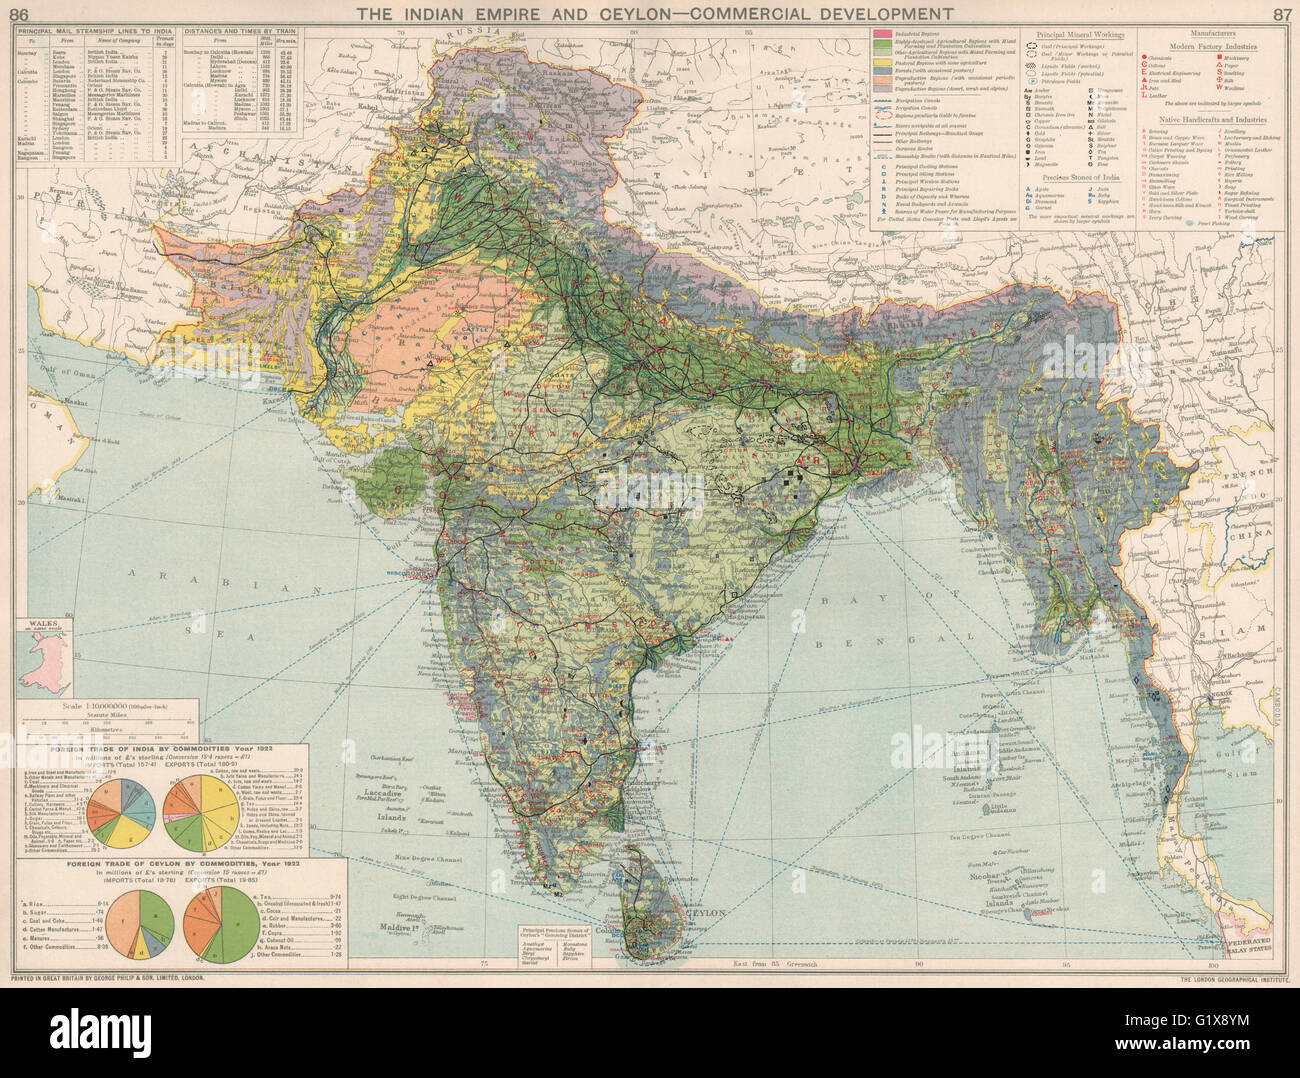 British India. Commercial Manufacturing Mining Minerals Agricultural, 1925 map Stock Photo